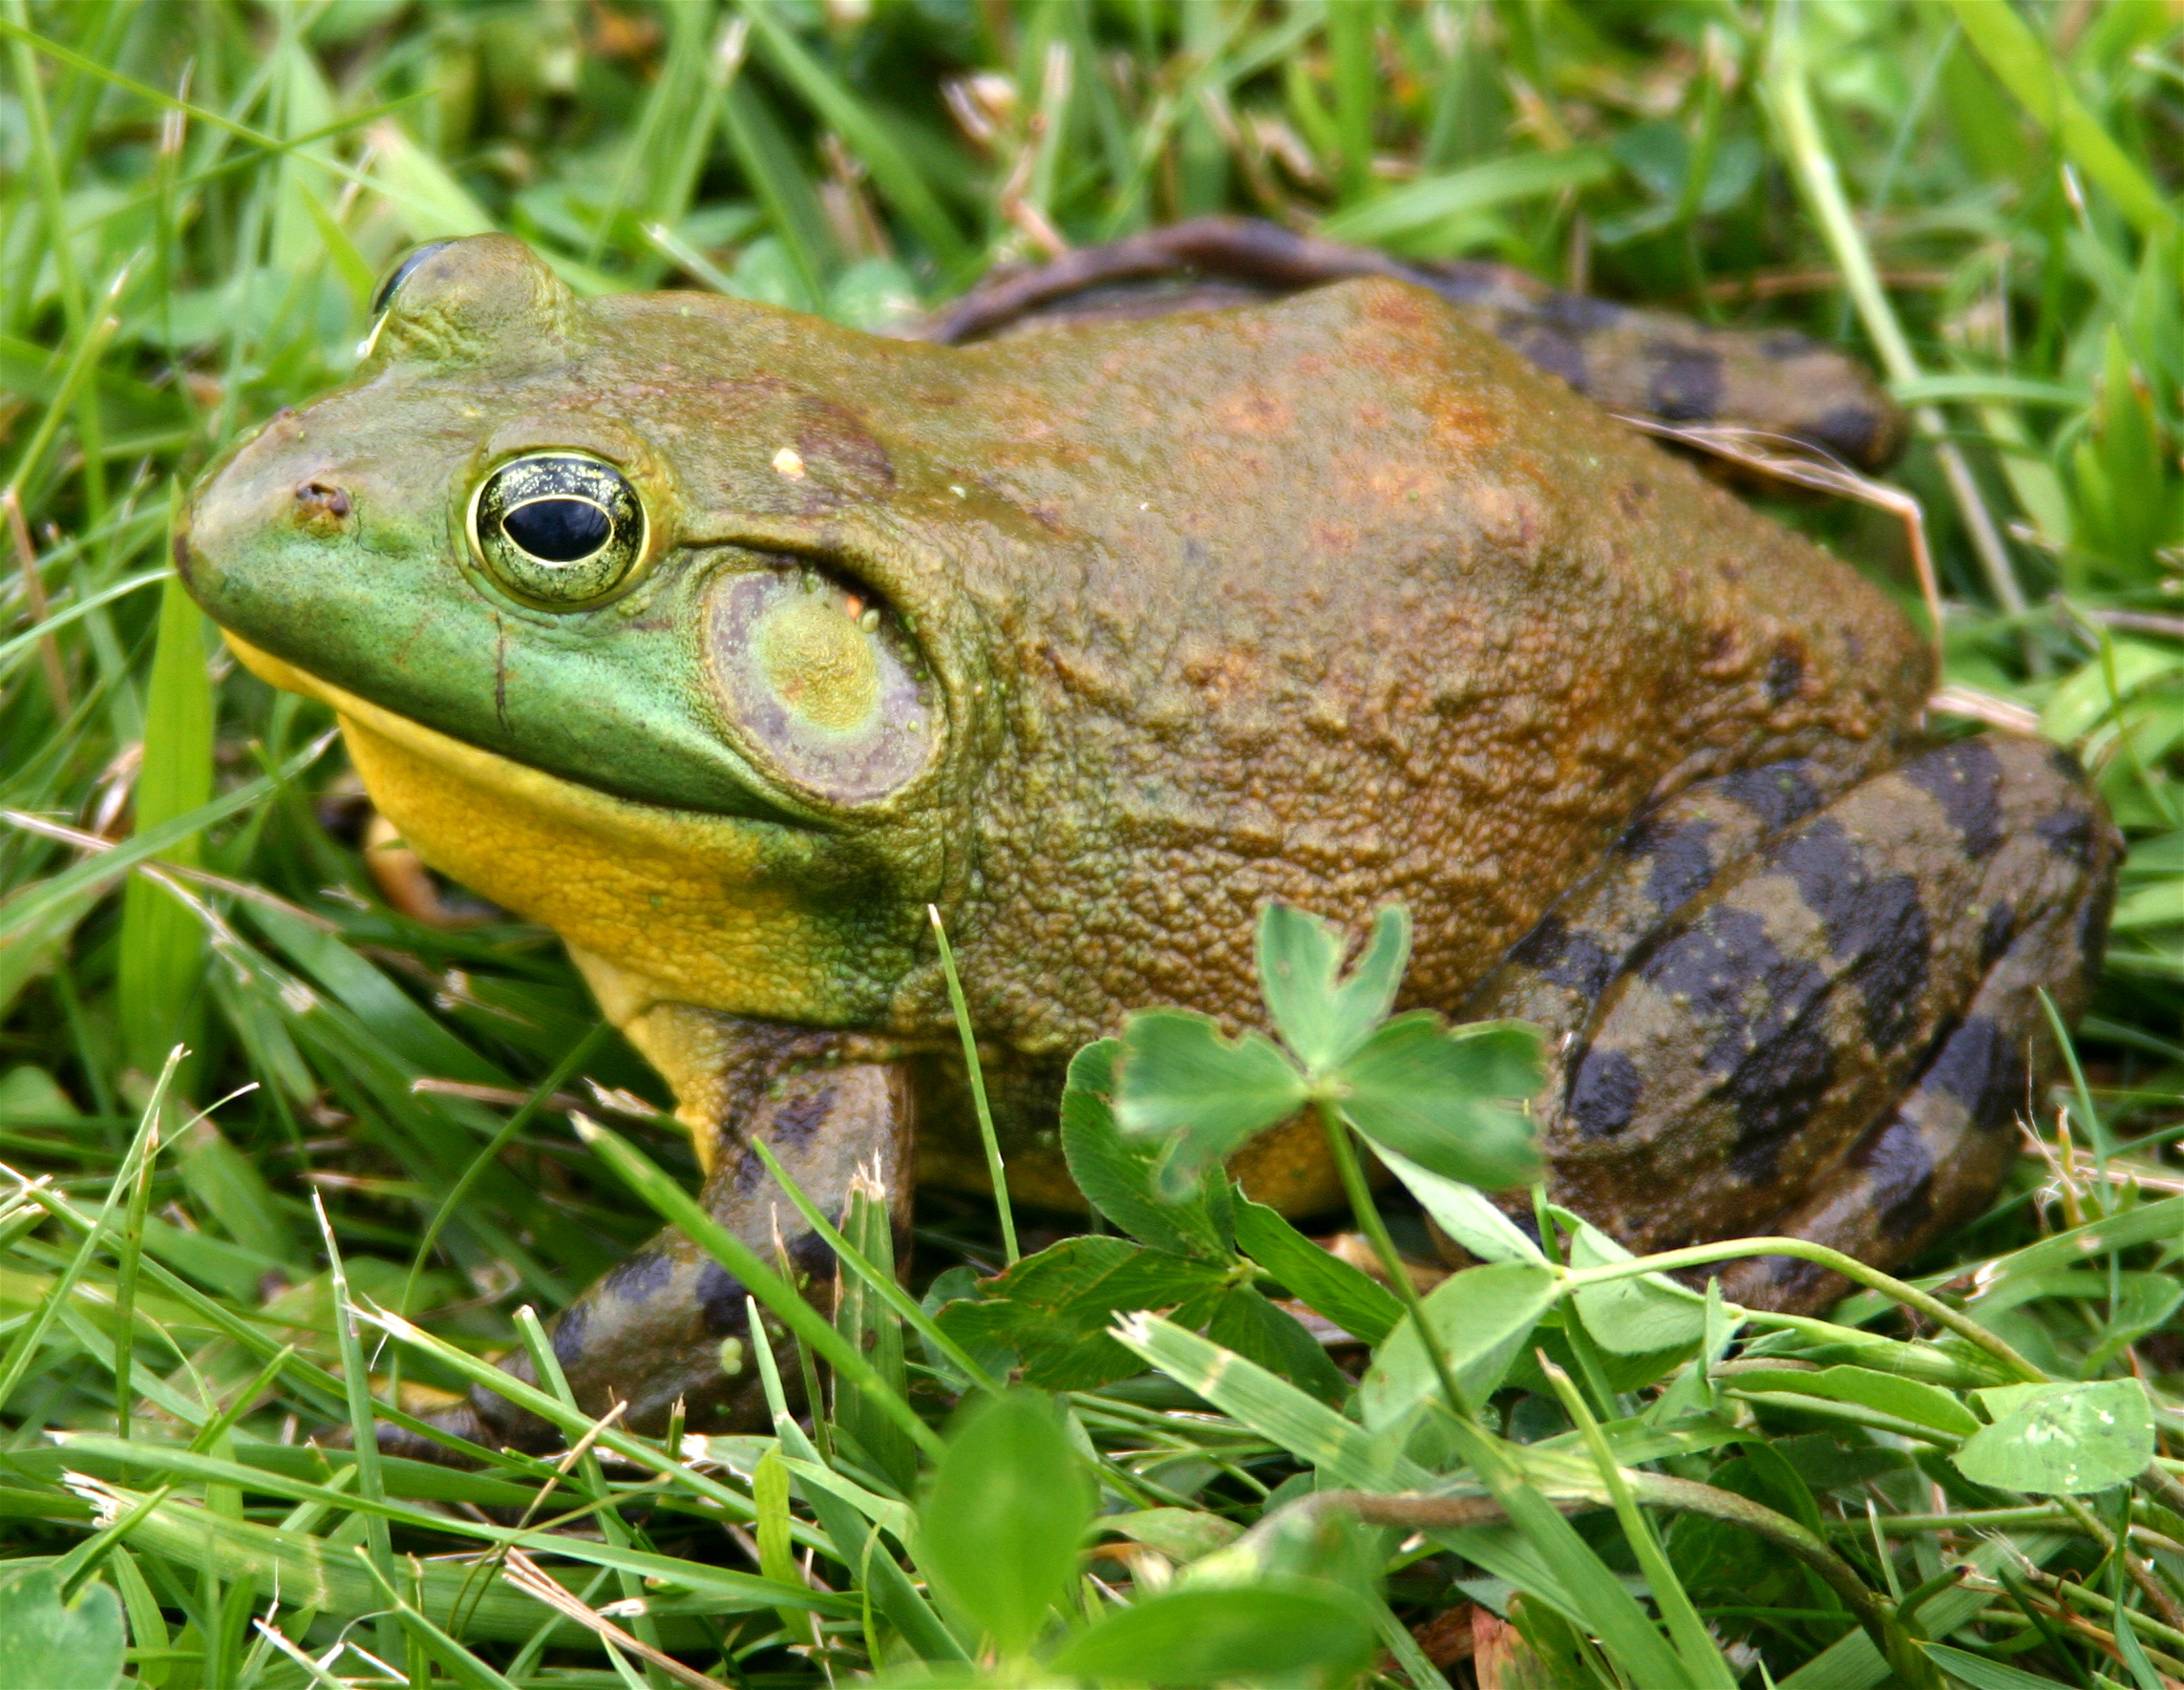 What is bullfrog known for?